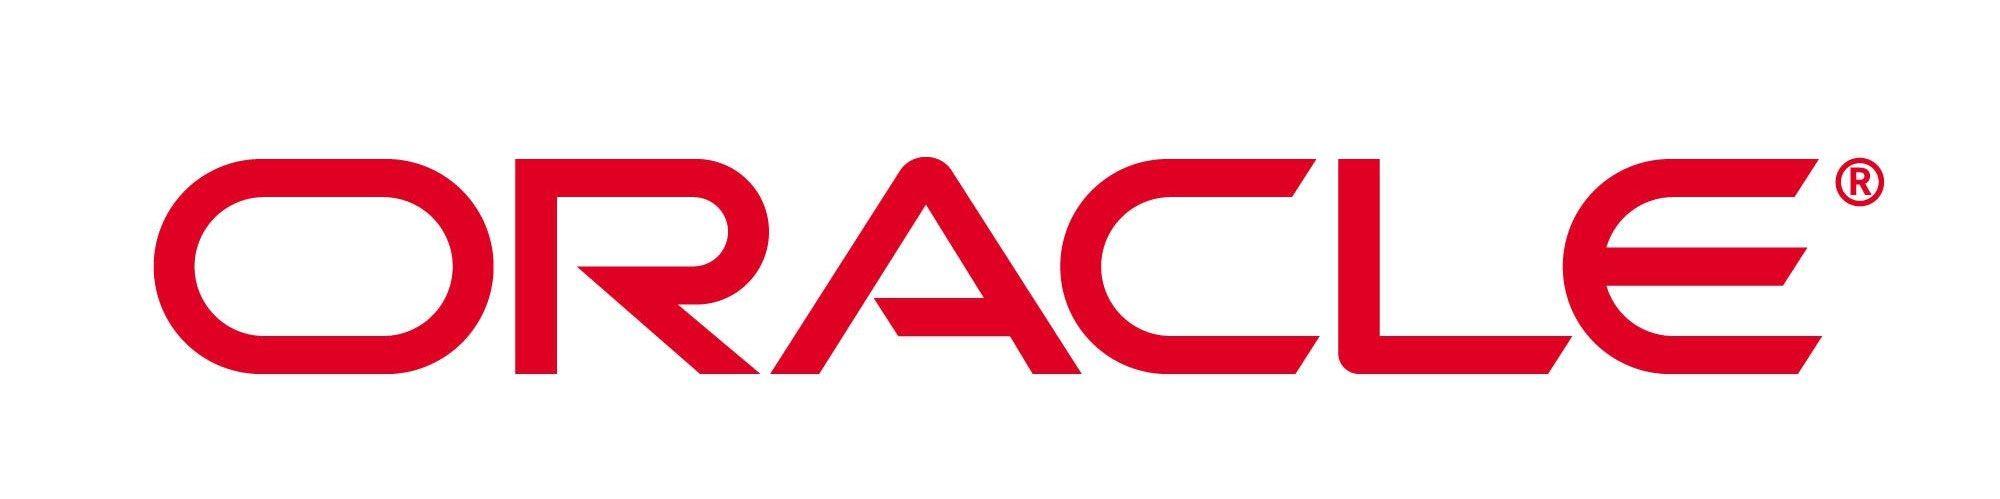 Oracle CRM Logo - What is Oracle CRM on demand?